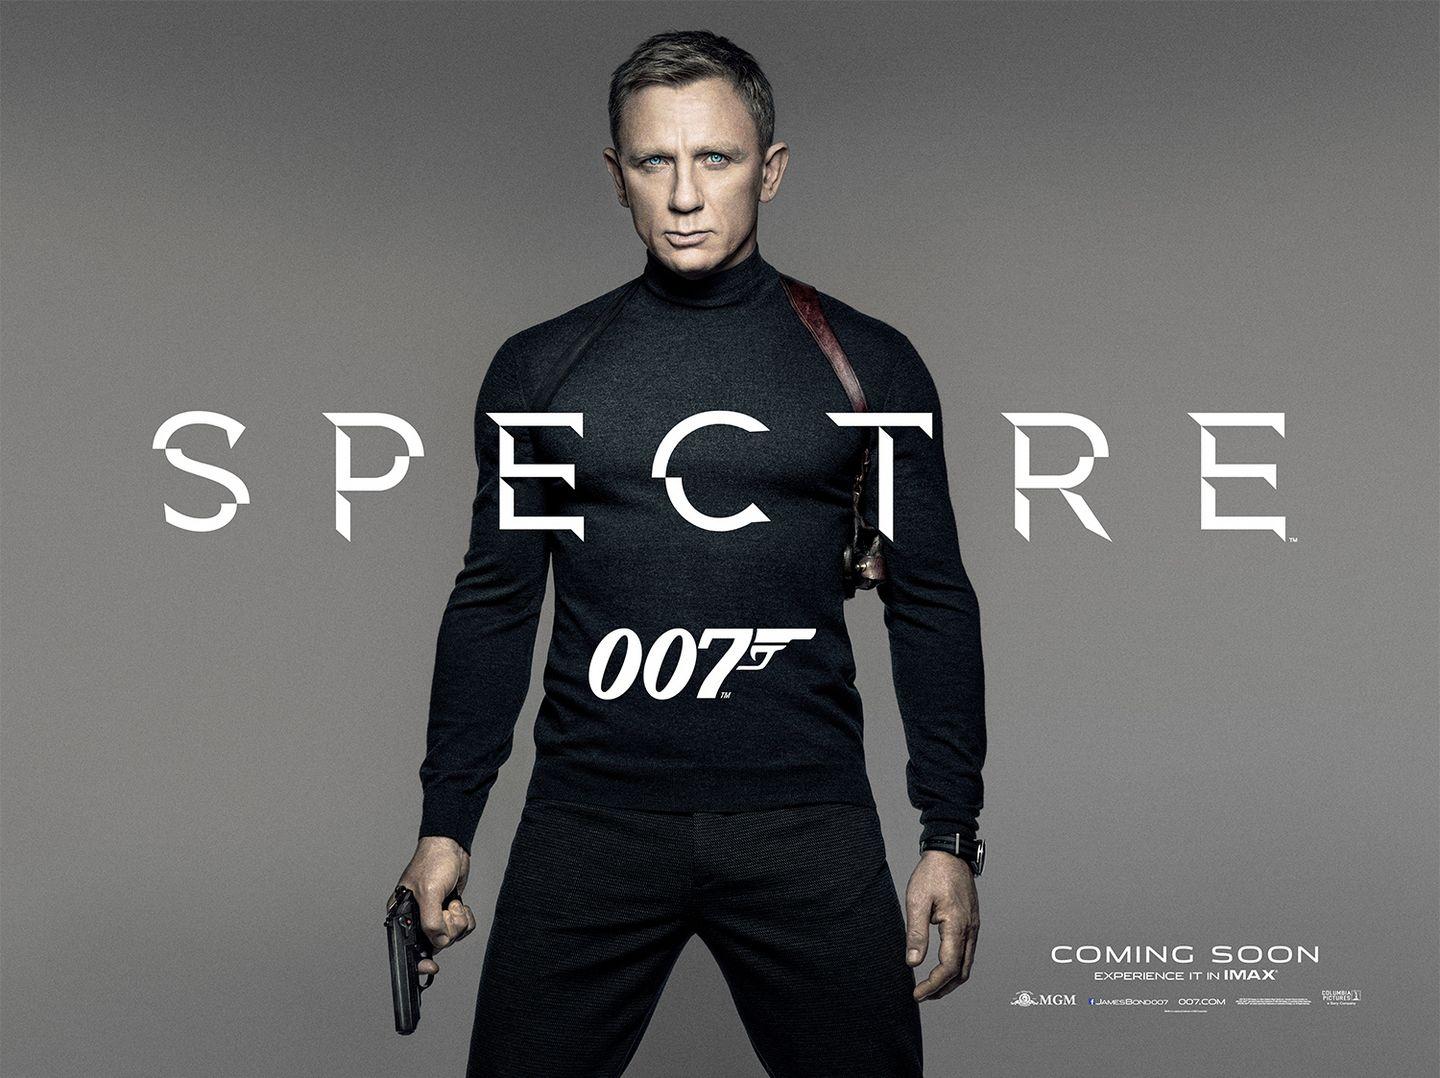 Spectre 007 Movie Posters